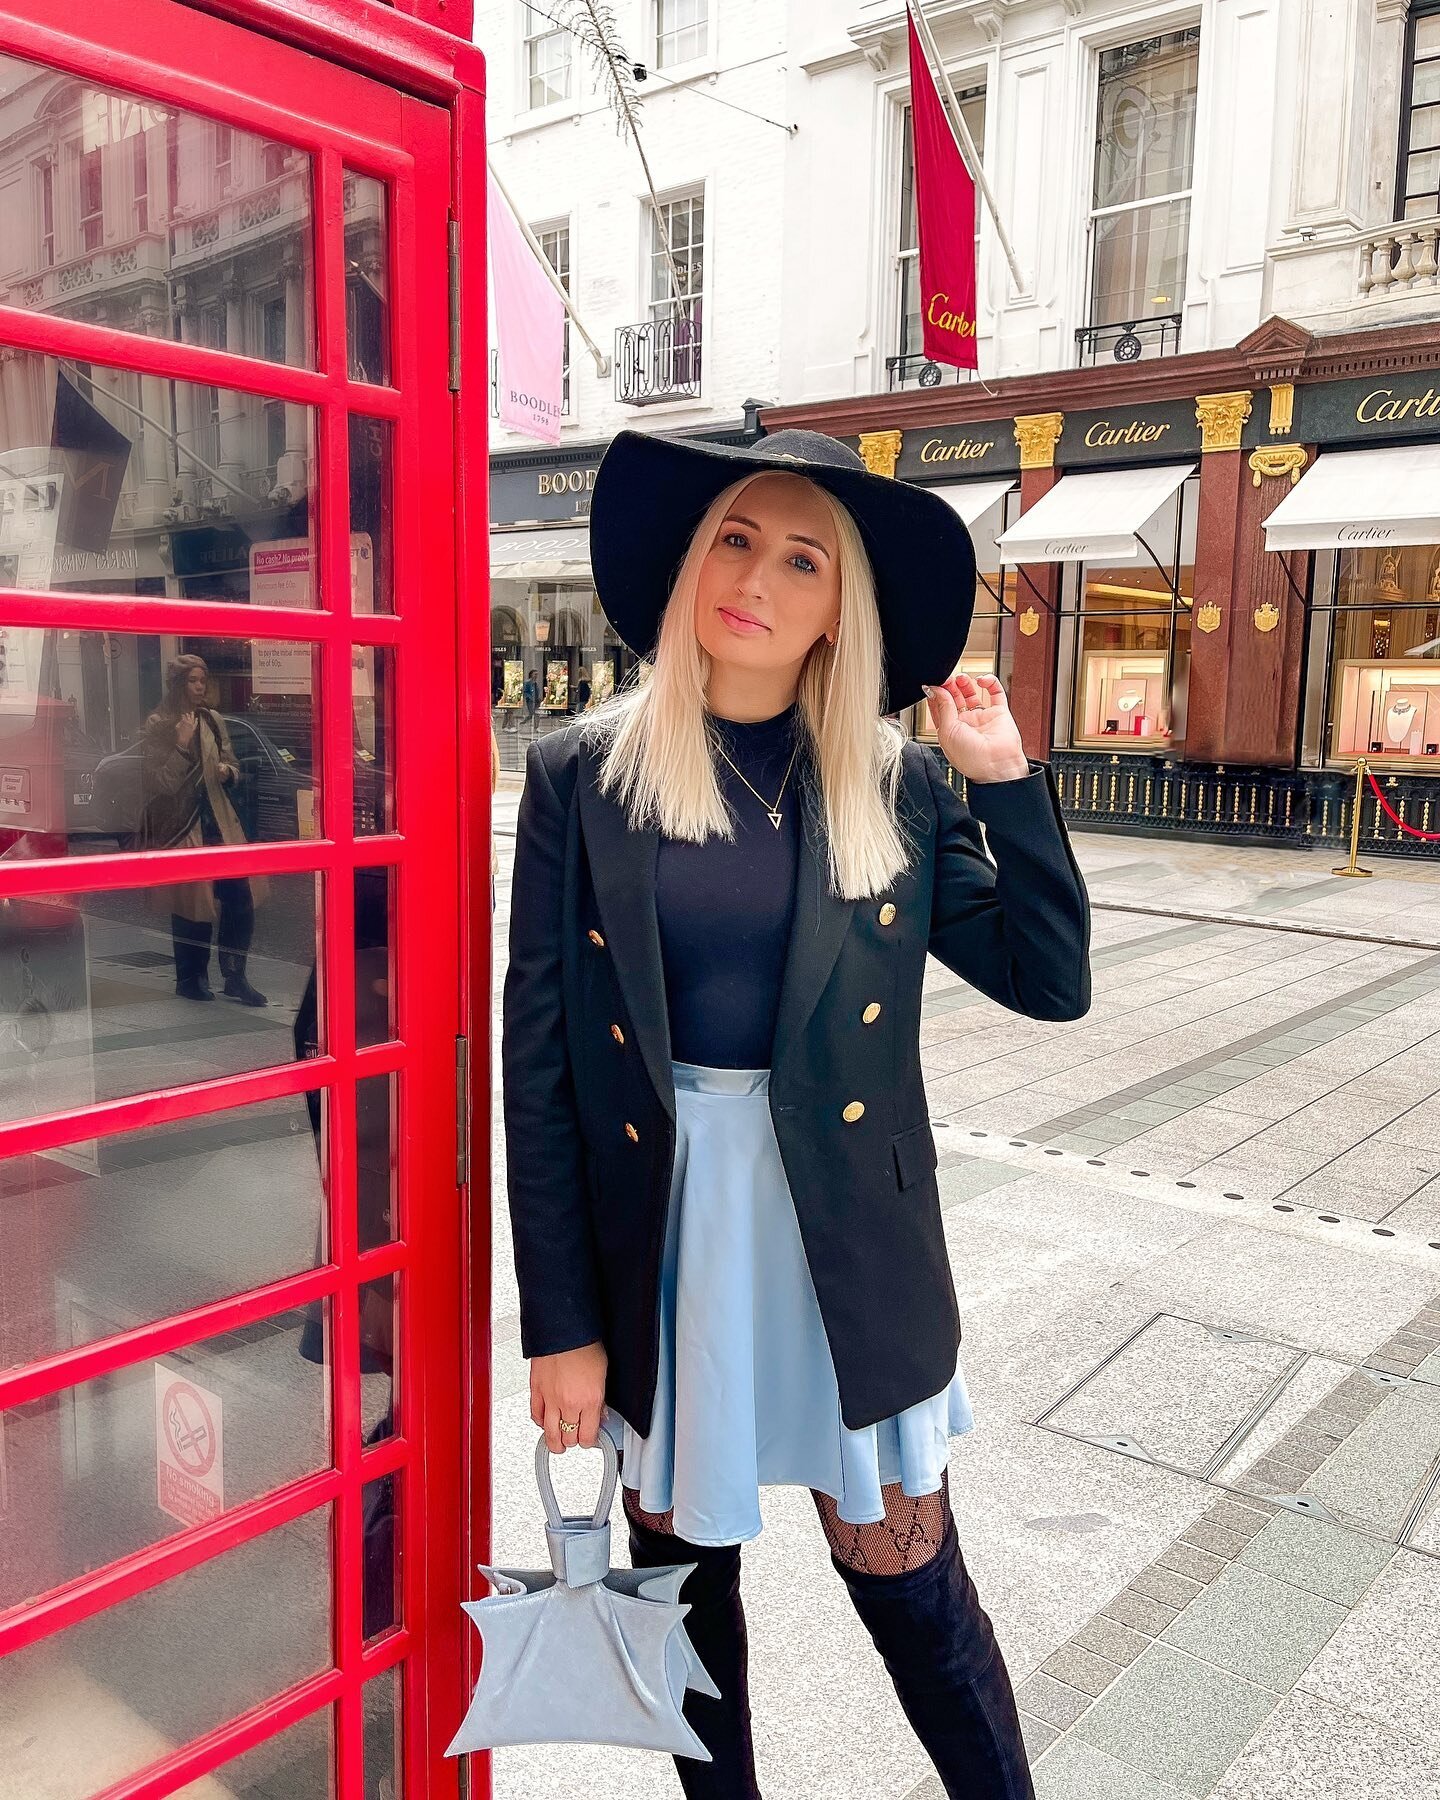 Hey London! It&rsquo;s good to be back even if it&rsquo;s for a short trip to see family 💗
.
Advertisement- wearing my @marie.delaroche Cassiopeia collection bag launching this Friday October 29th 5pm Dubai time through the virtual trunk show I will